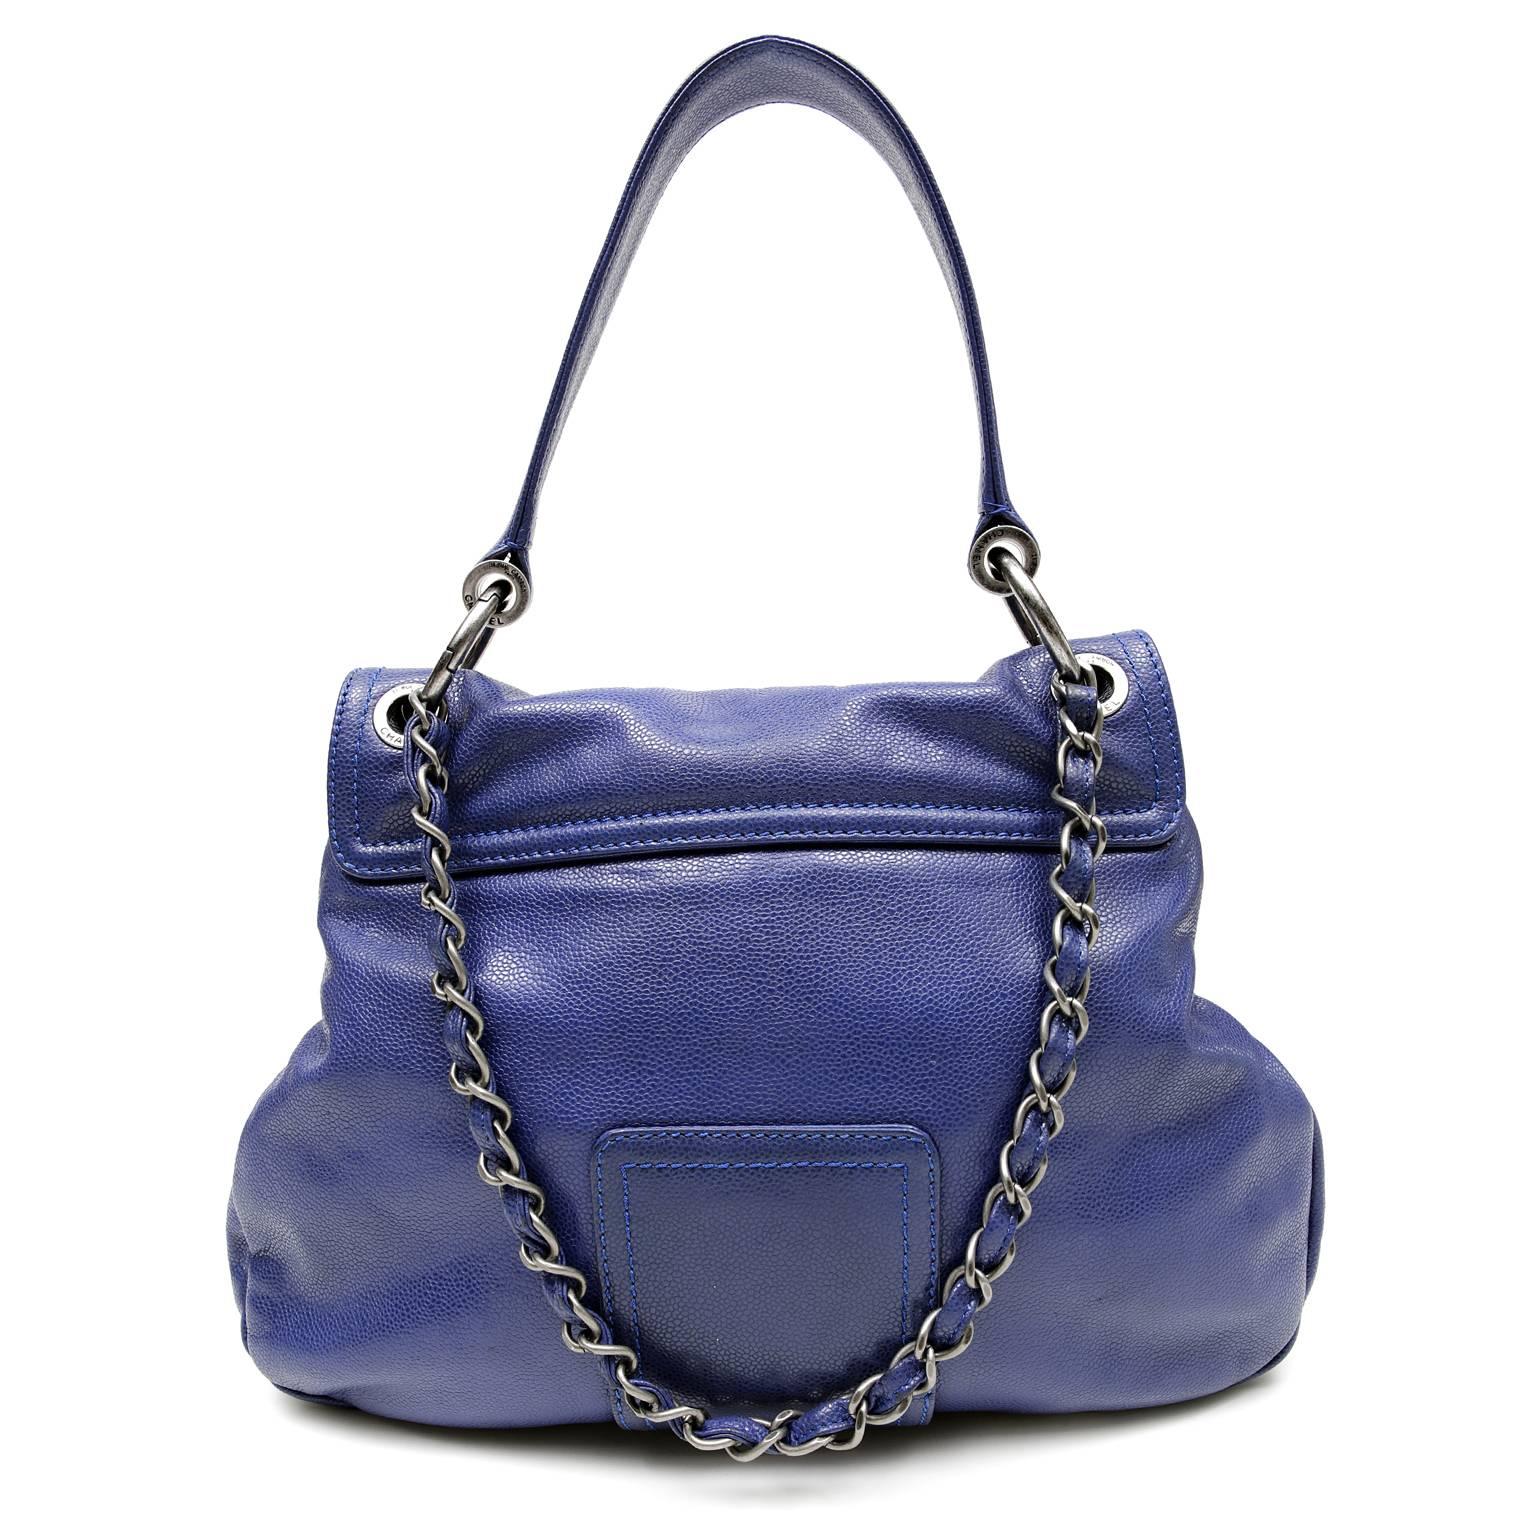 Chanel Cobalt Blue Caviar Leather Hobo- PRISTINE
 The bold color combined with the versatility of the optional strap choices makes this unique piece a great daily bag.

Vivid cobalt blue caviar leather is textured and durable.  It is further